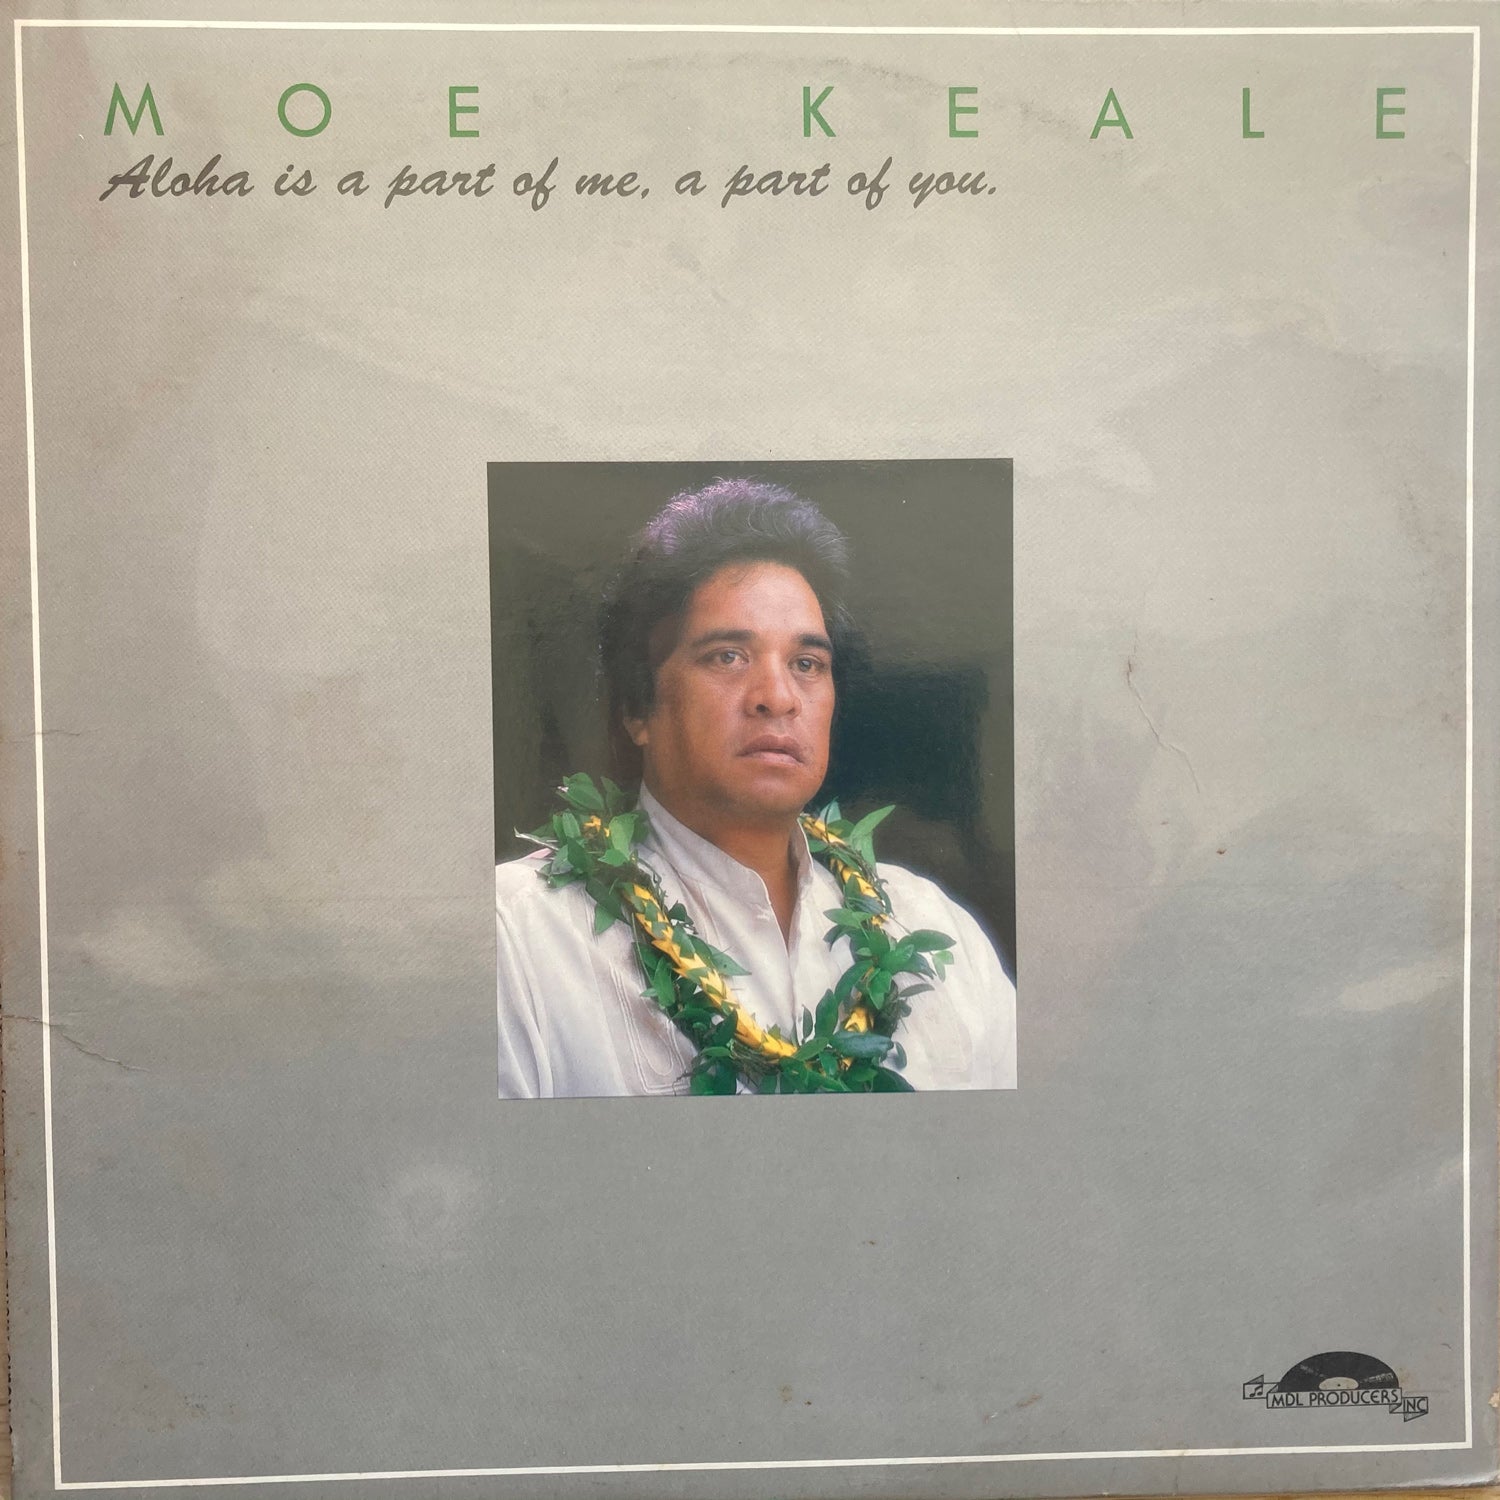 Moe Keale - Aloha is a part of me, a part of you